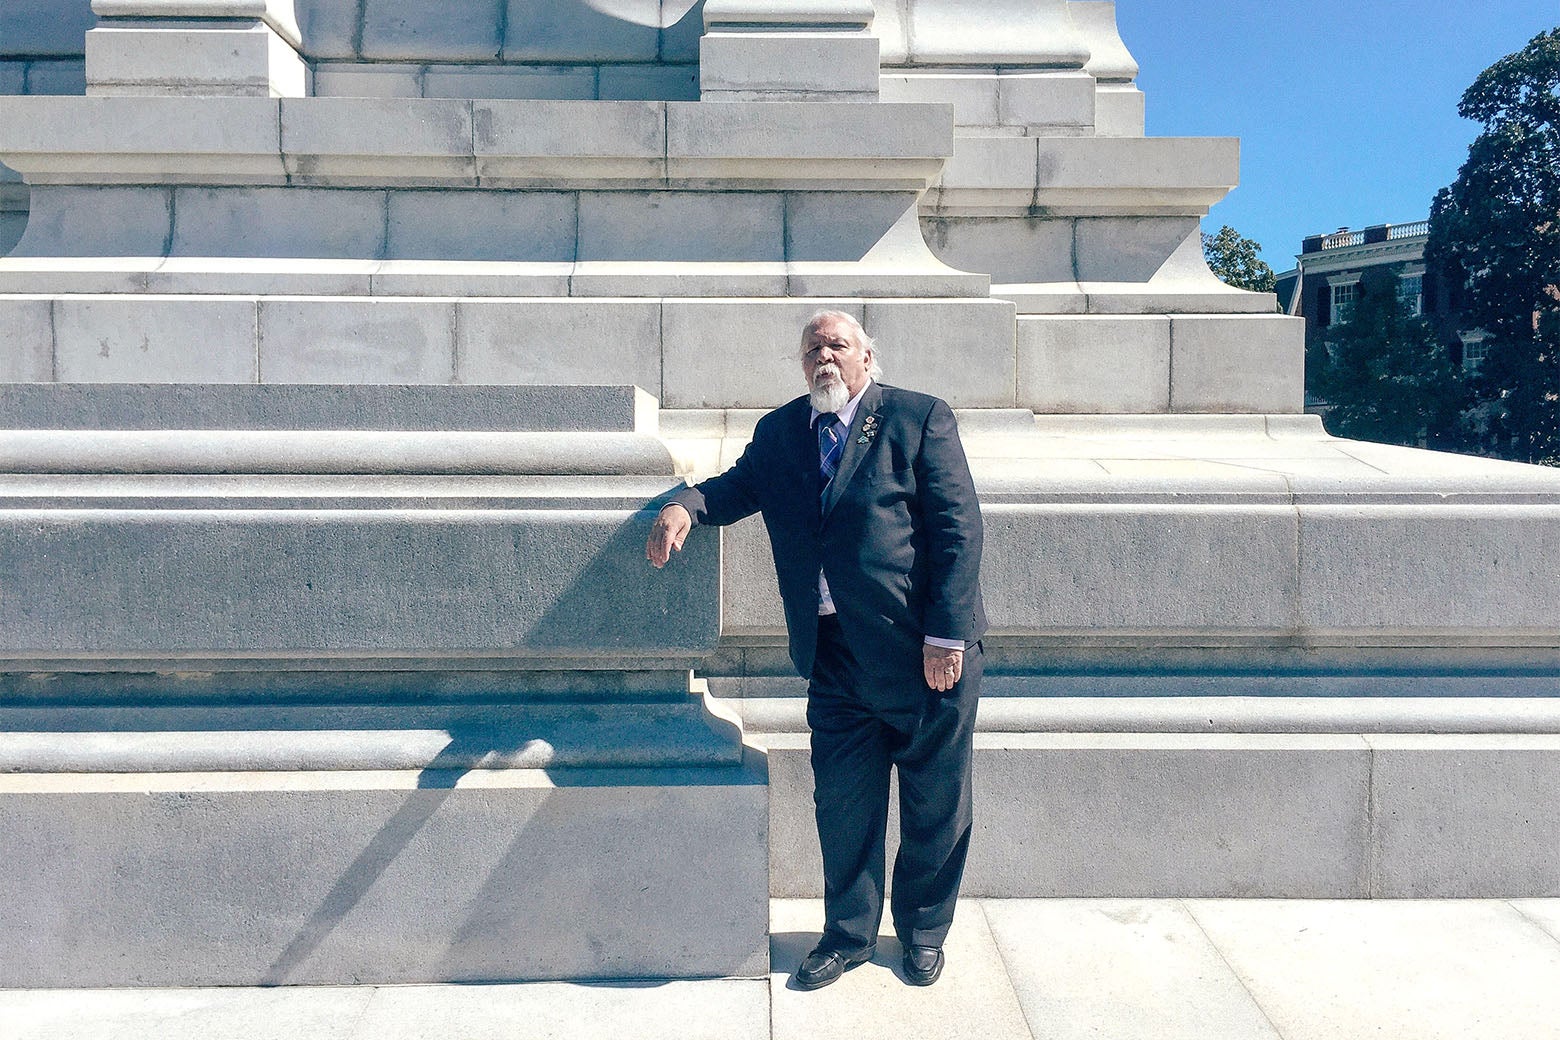 Frank Earnest of the Virginia Division of the Sons of Confederate Veterans stands at the base of the Robert E. Lee memorial on Monument Avenue in Richmond, Virginia.